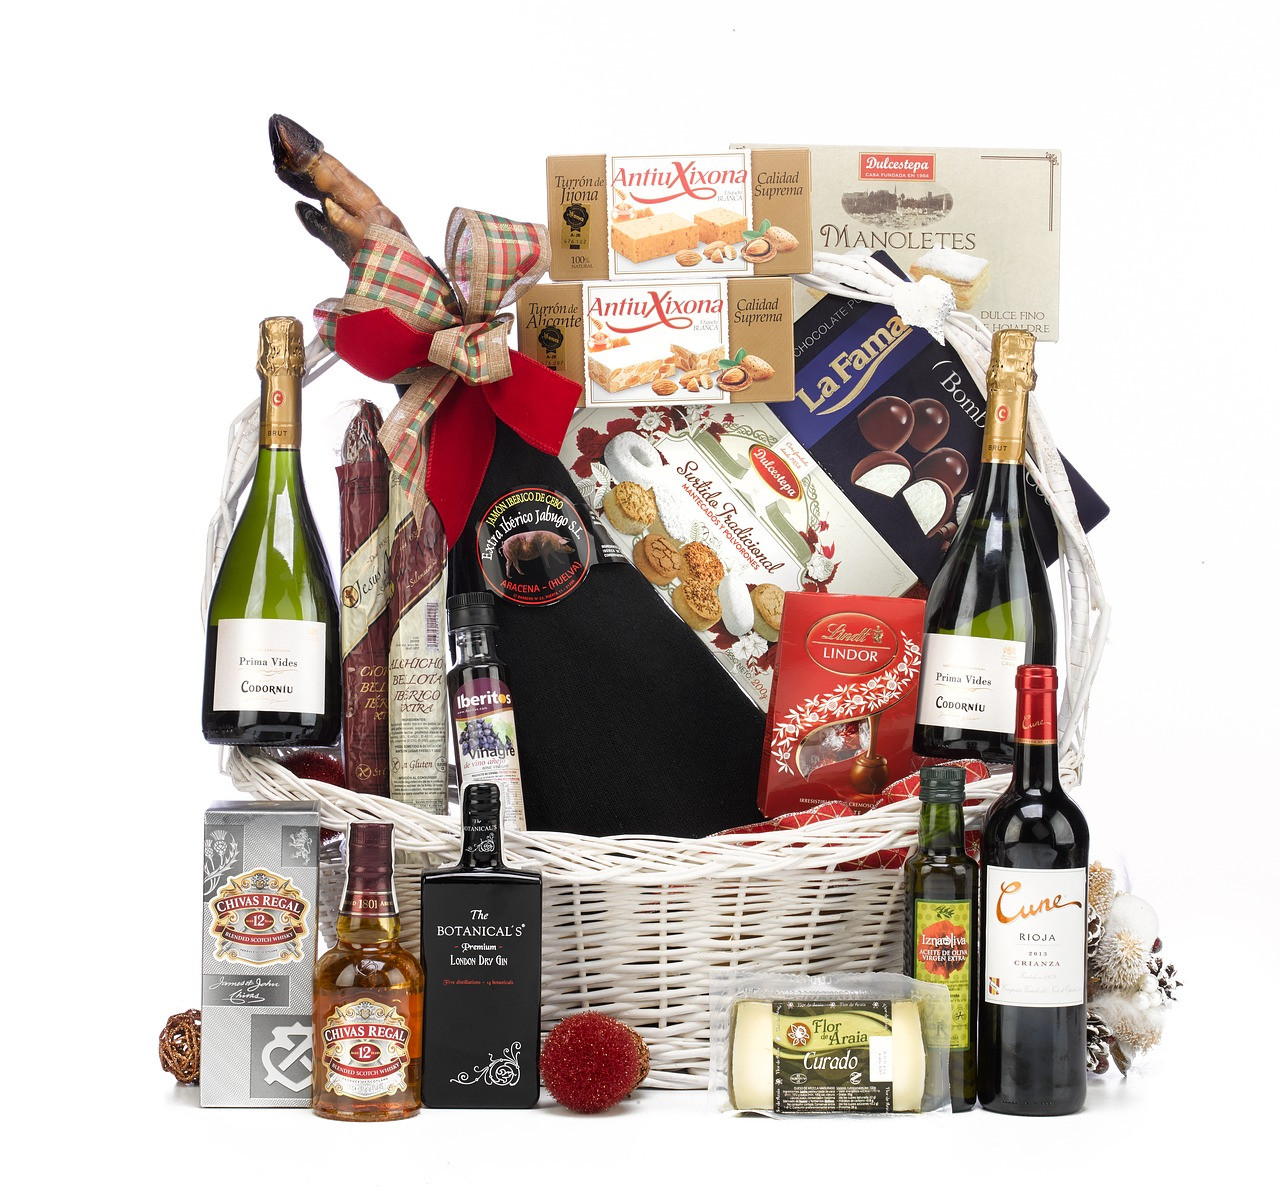 Gift Baskets Business Ideas
 How to Start a Gift Basket Business in 7 Steps